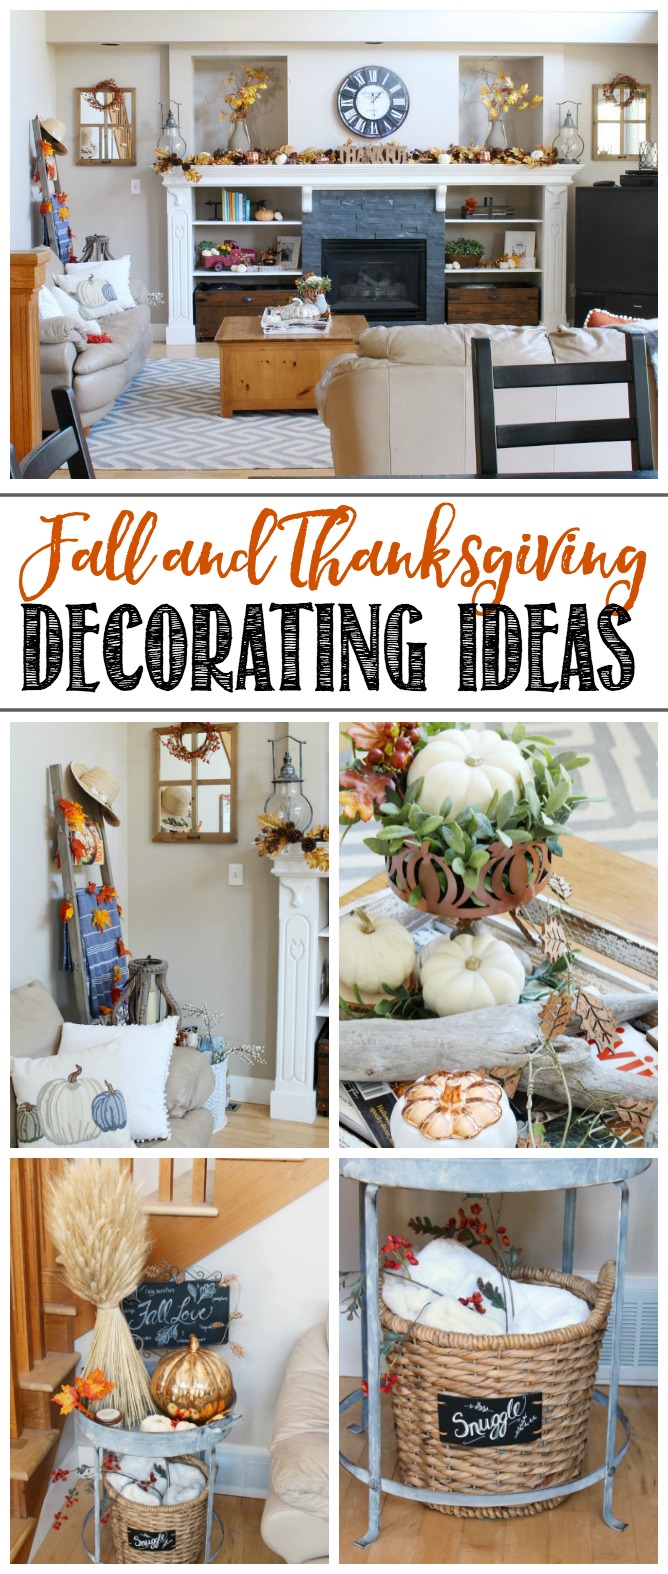 Beautiful fall and Thanksgiving decorating ideas to add warmth and coziness to your home. #thanksgiving #falldecorating